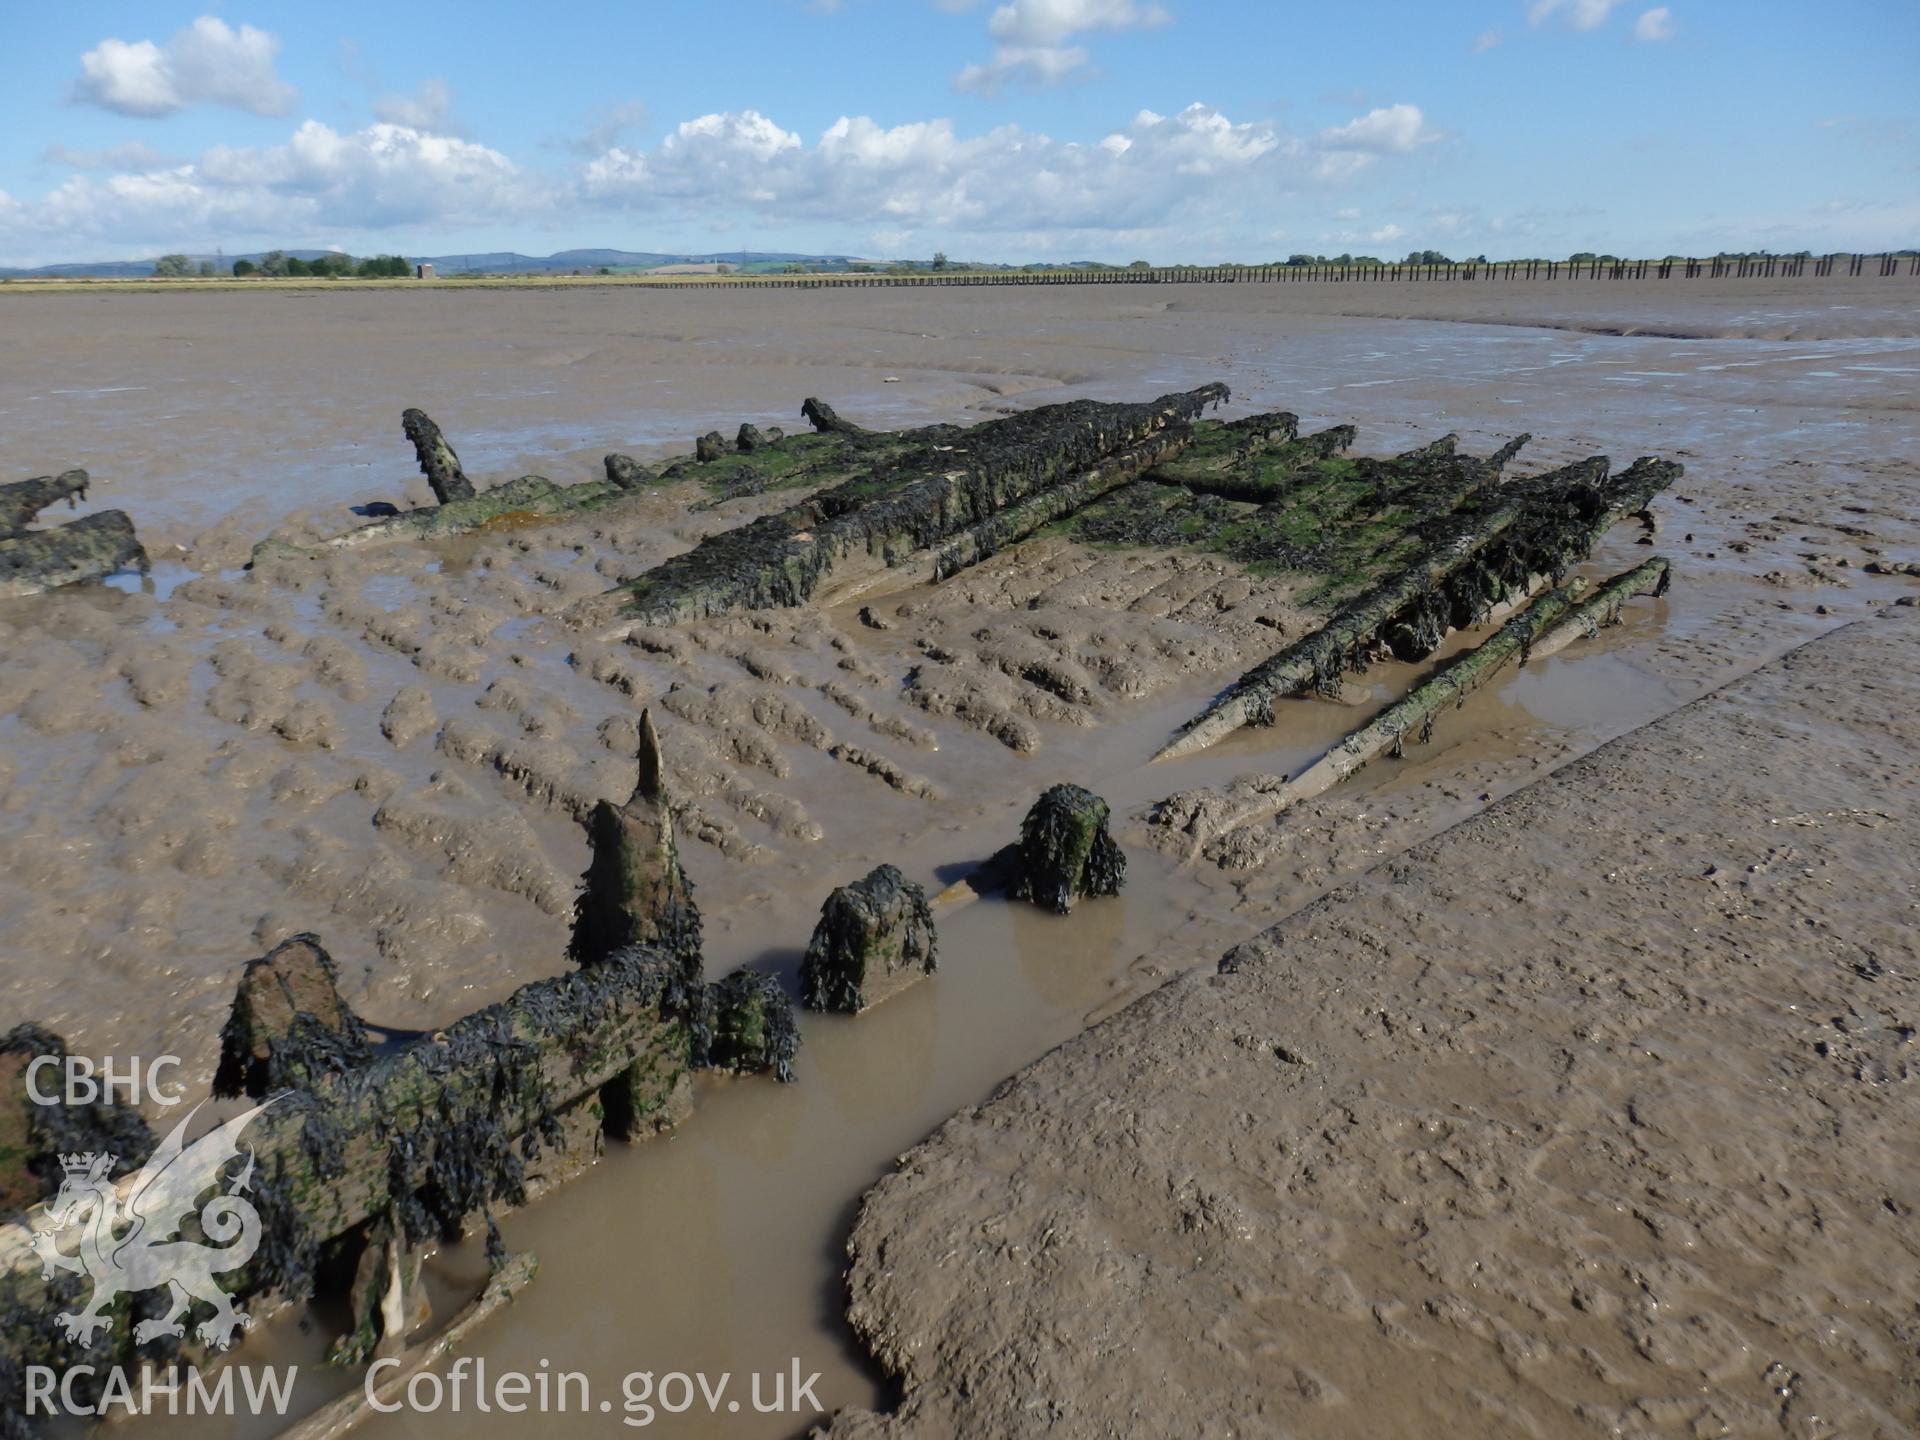 Aerial photograph showing wreck at Rumney Great Wharf, taken by Paul Davis, 29th August 2016.